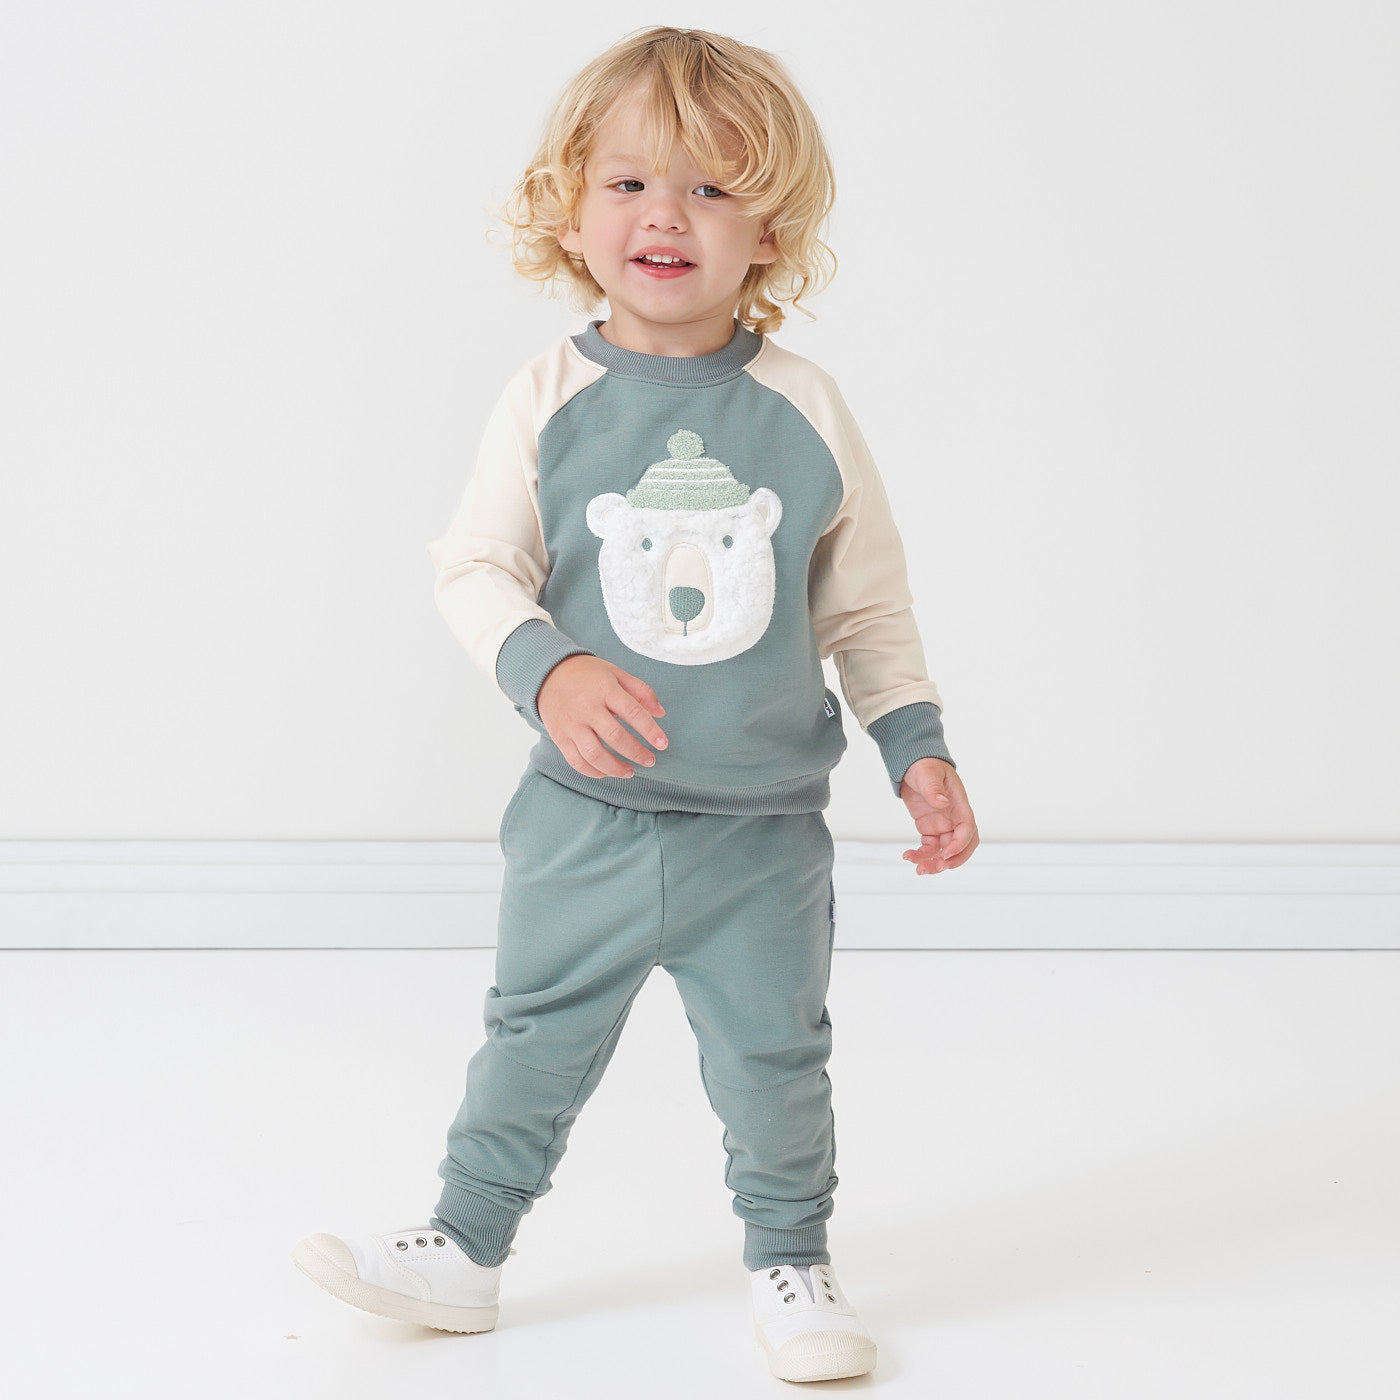 Alternate image of a child wearing a Polar Bear crewneck sweatshirt and coordinating Vintage Teal joggers